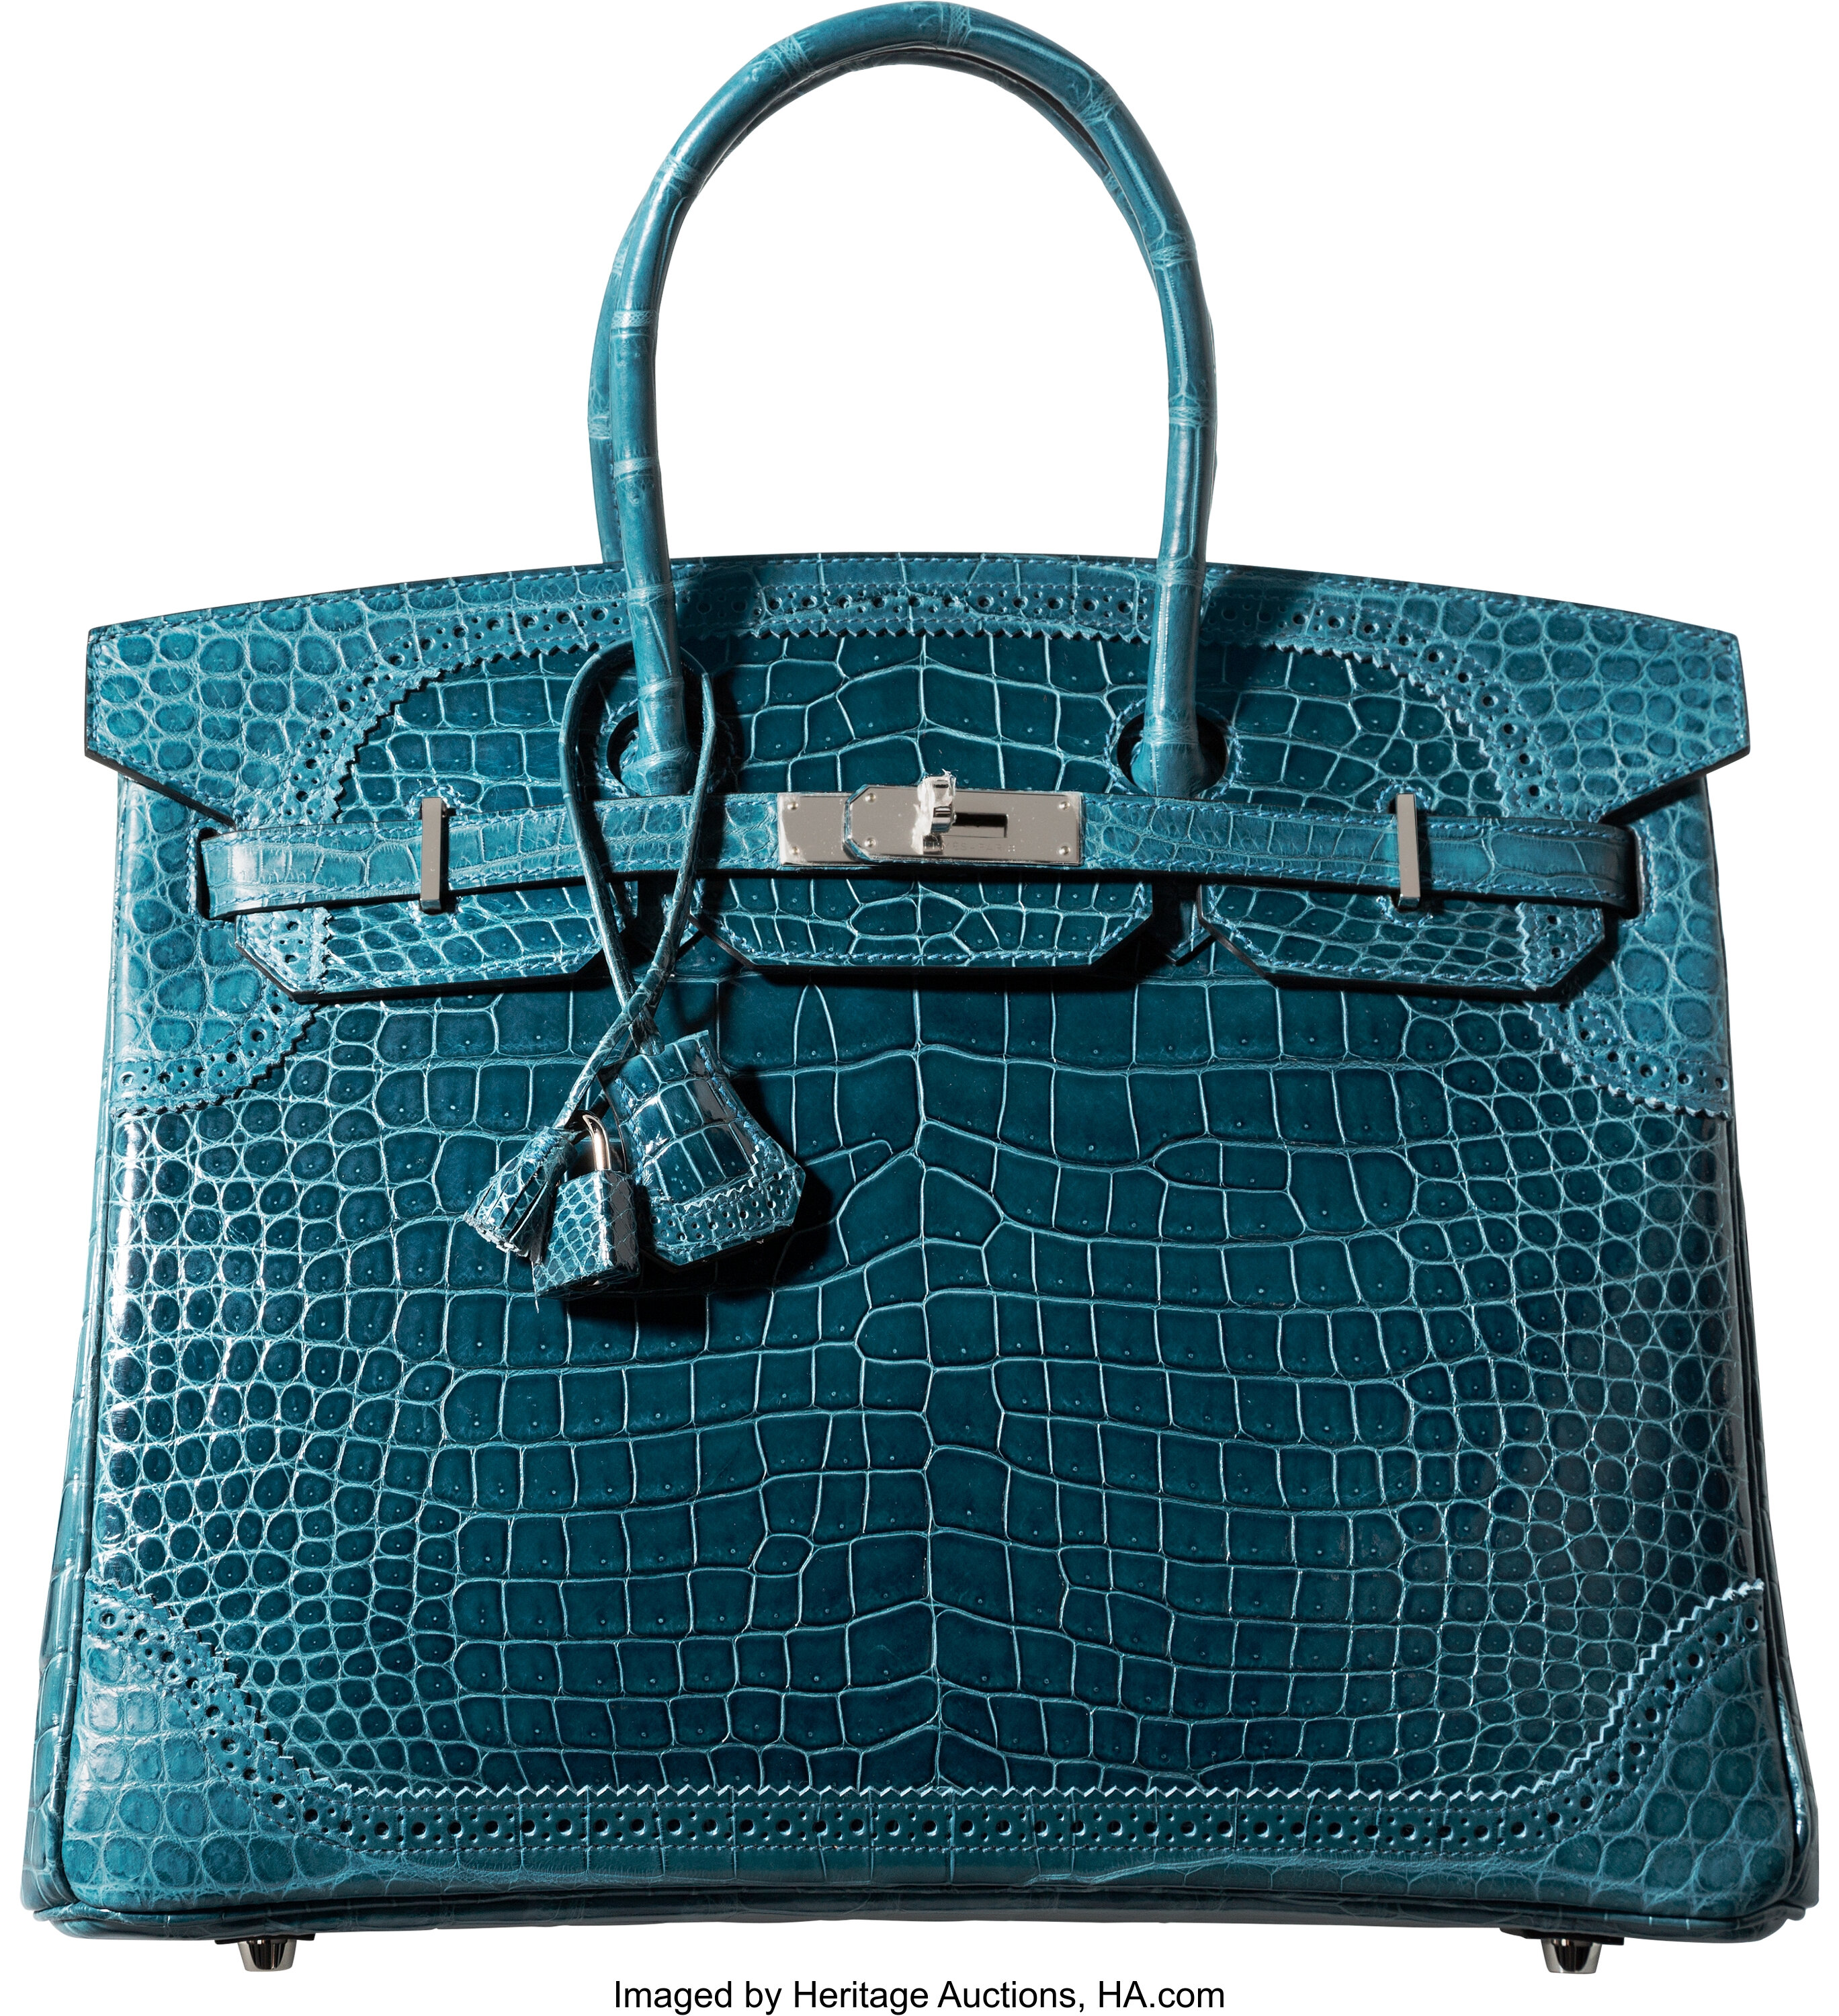 Sold at Auction: HERMÈS, Hermes A Limited Edition Shiny Vert